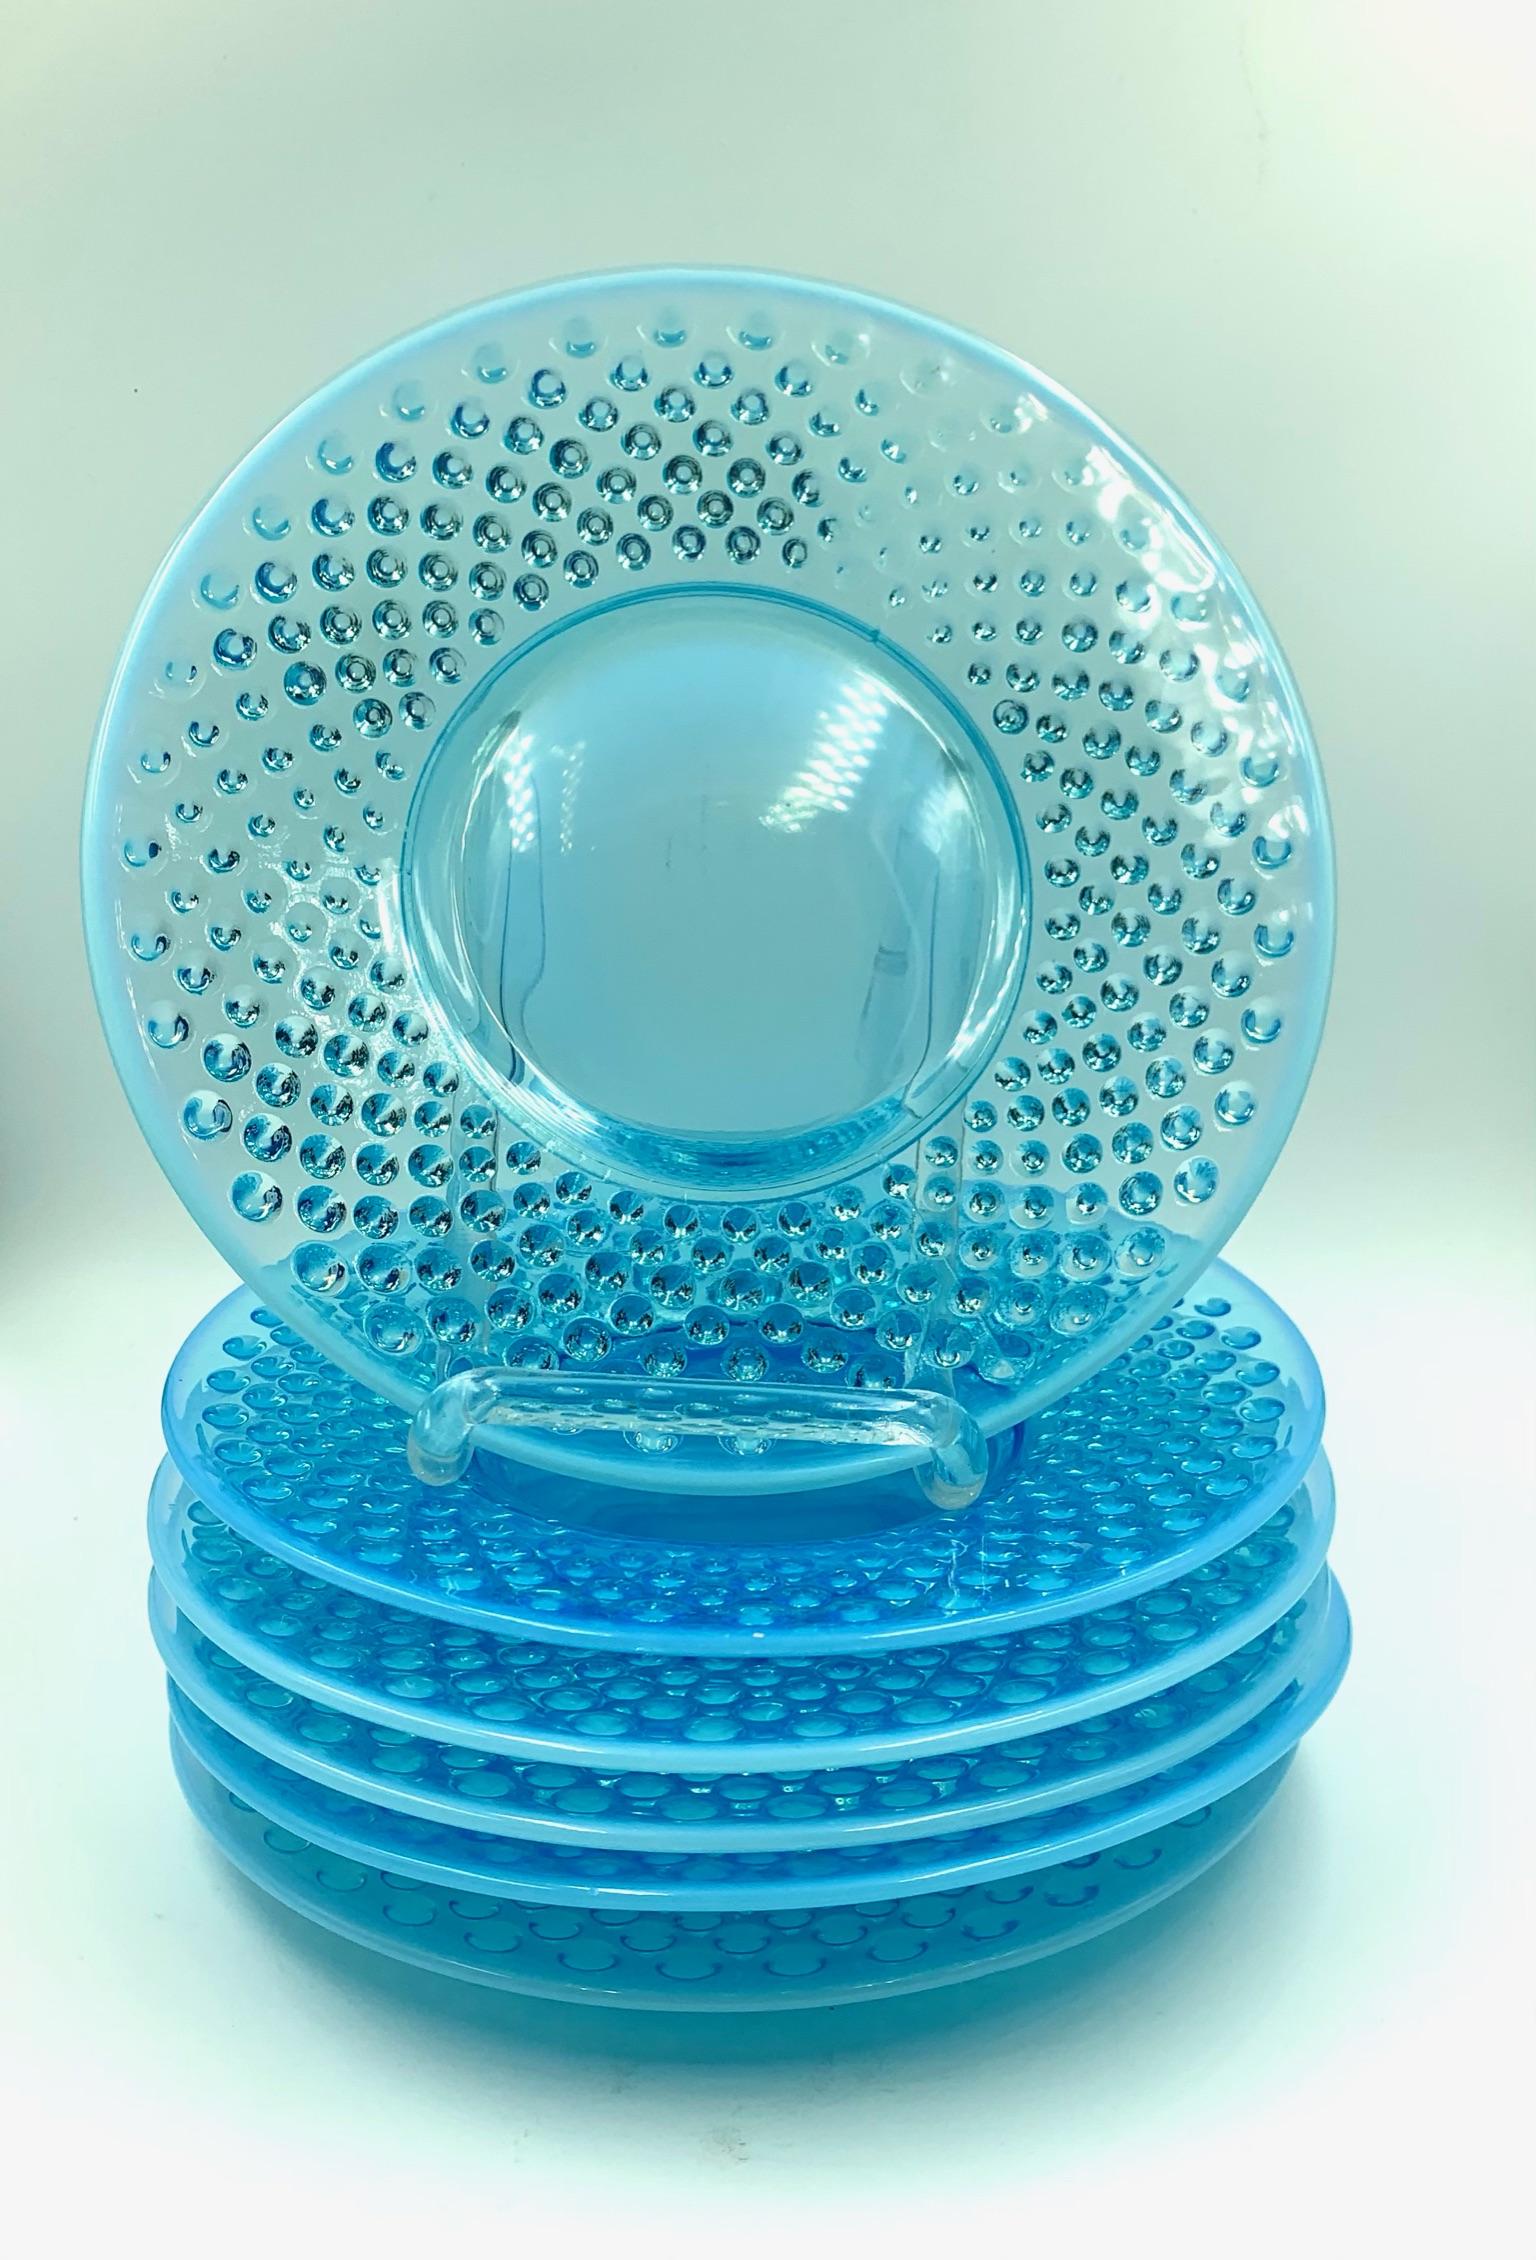 Delightful 7.88 inch aqua or turquoise blue hobnail depression glass plates are the perfect size to use for luncheon, dessert or salad.